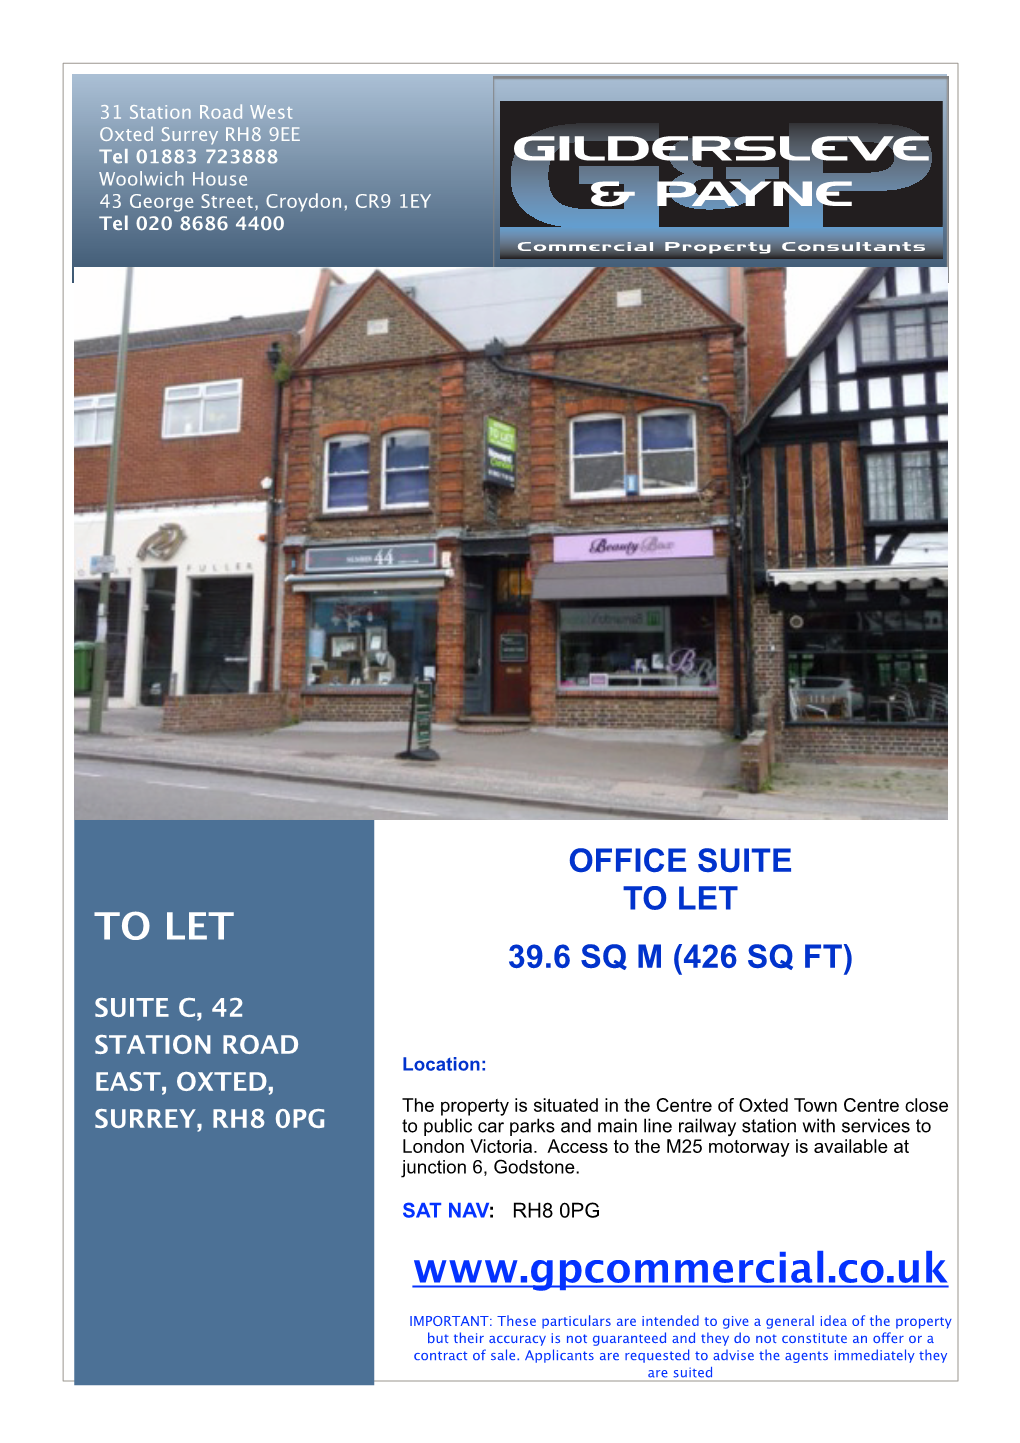 Suite C 42 Station Road East, Oxted Copy